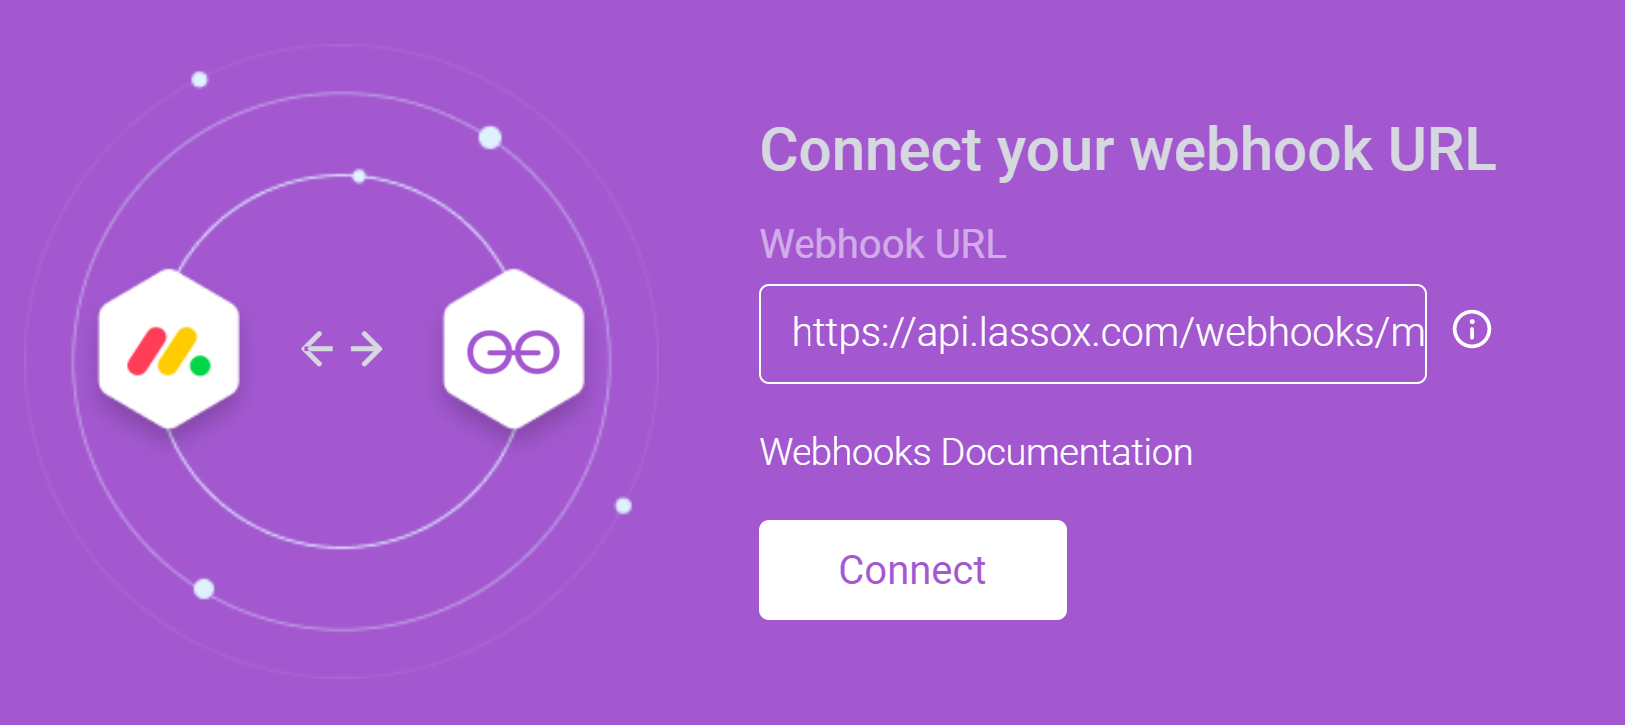 Connect you webhook URL